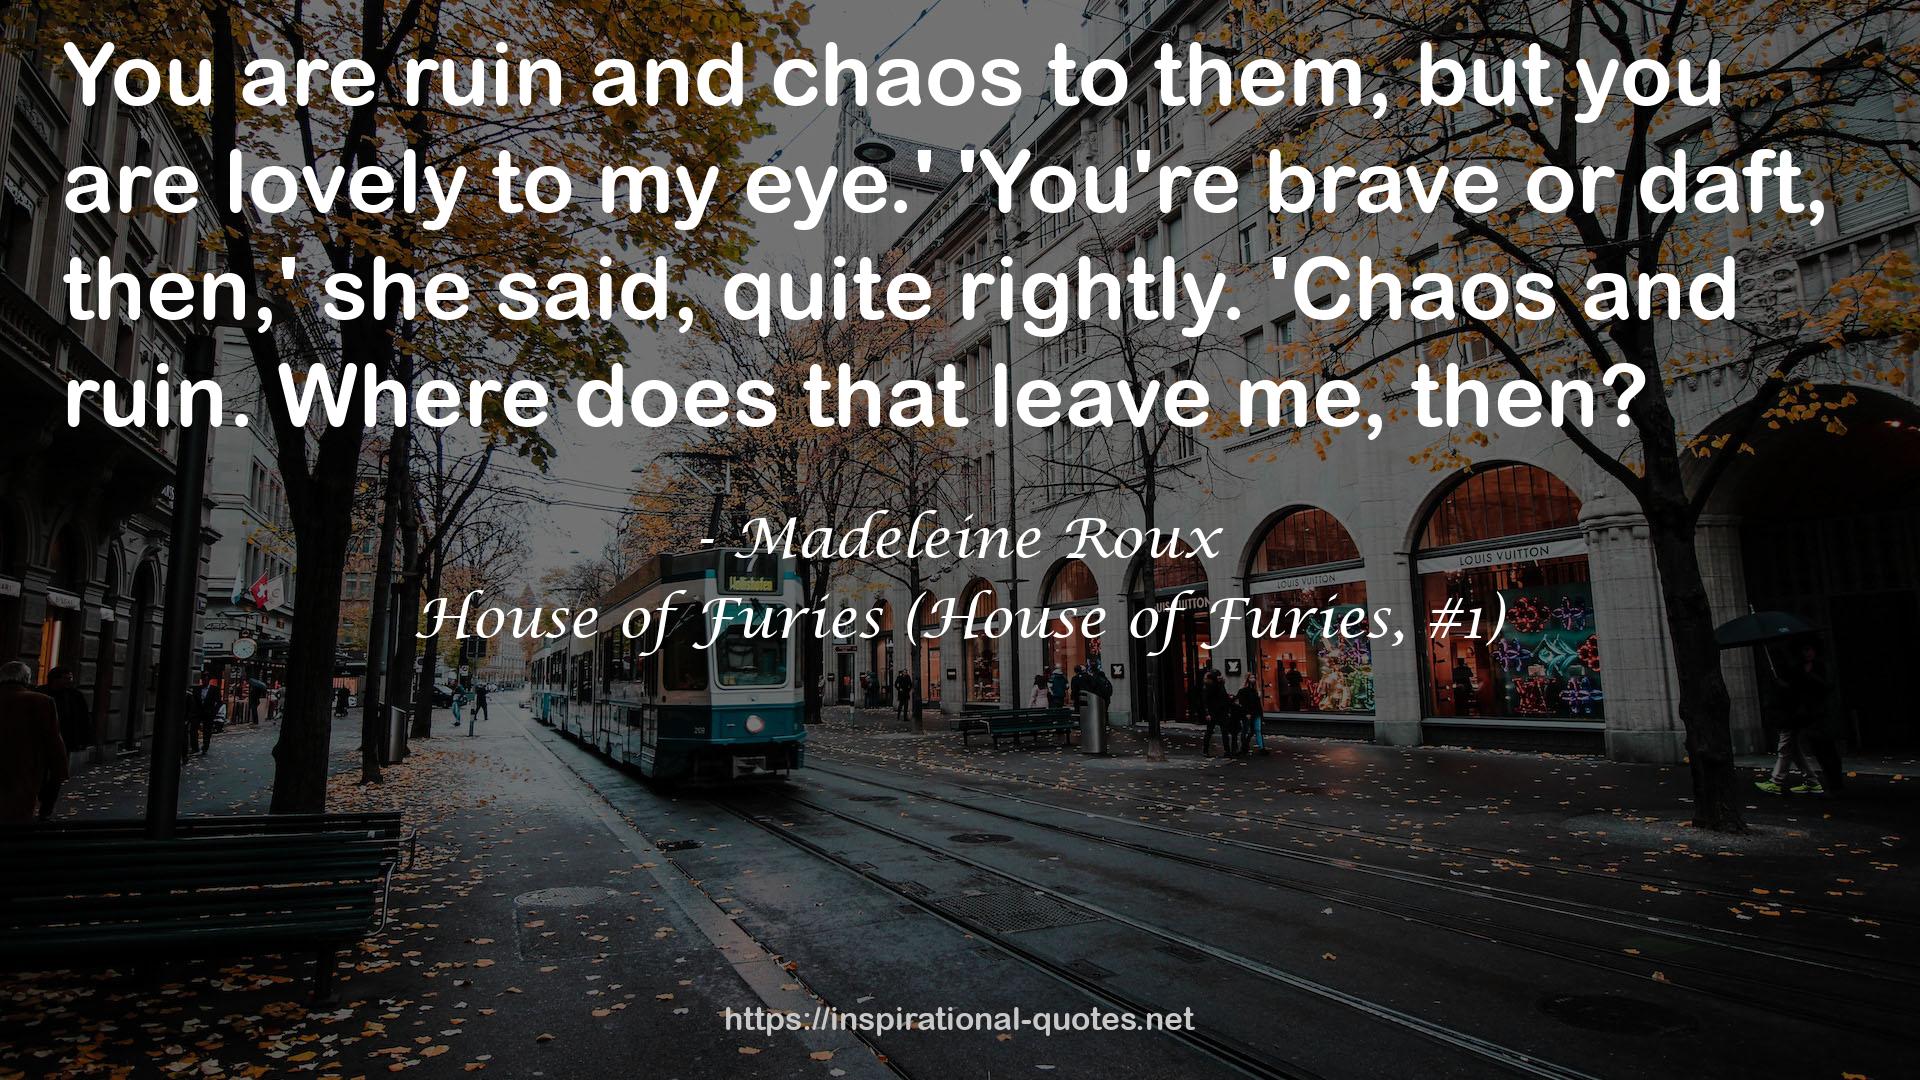 House of Furies (House of Furies, #1) QUOTES